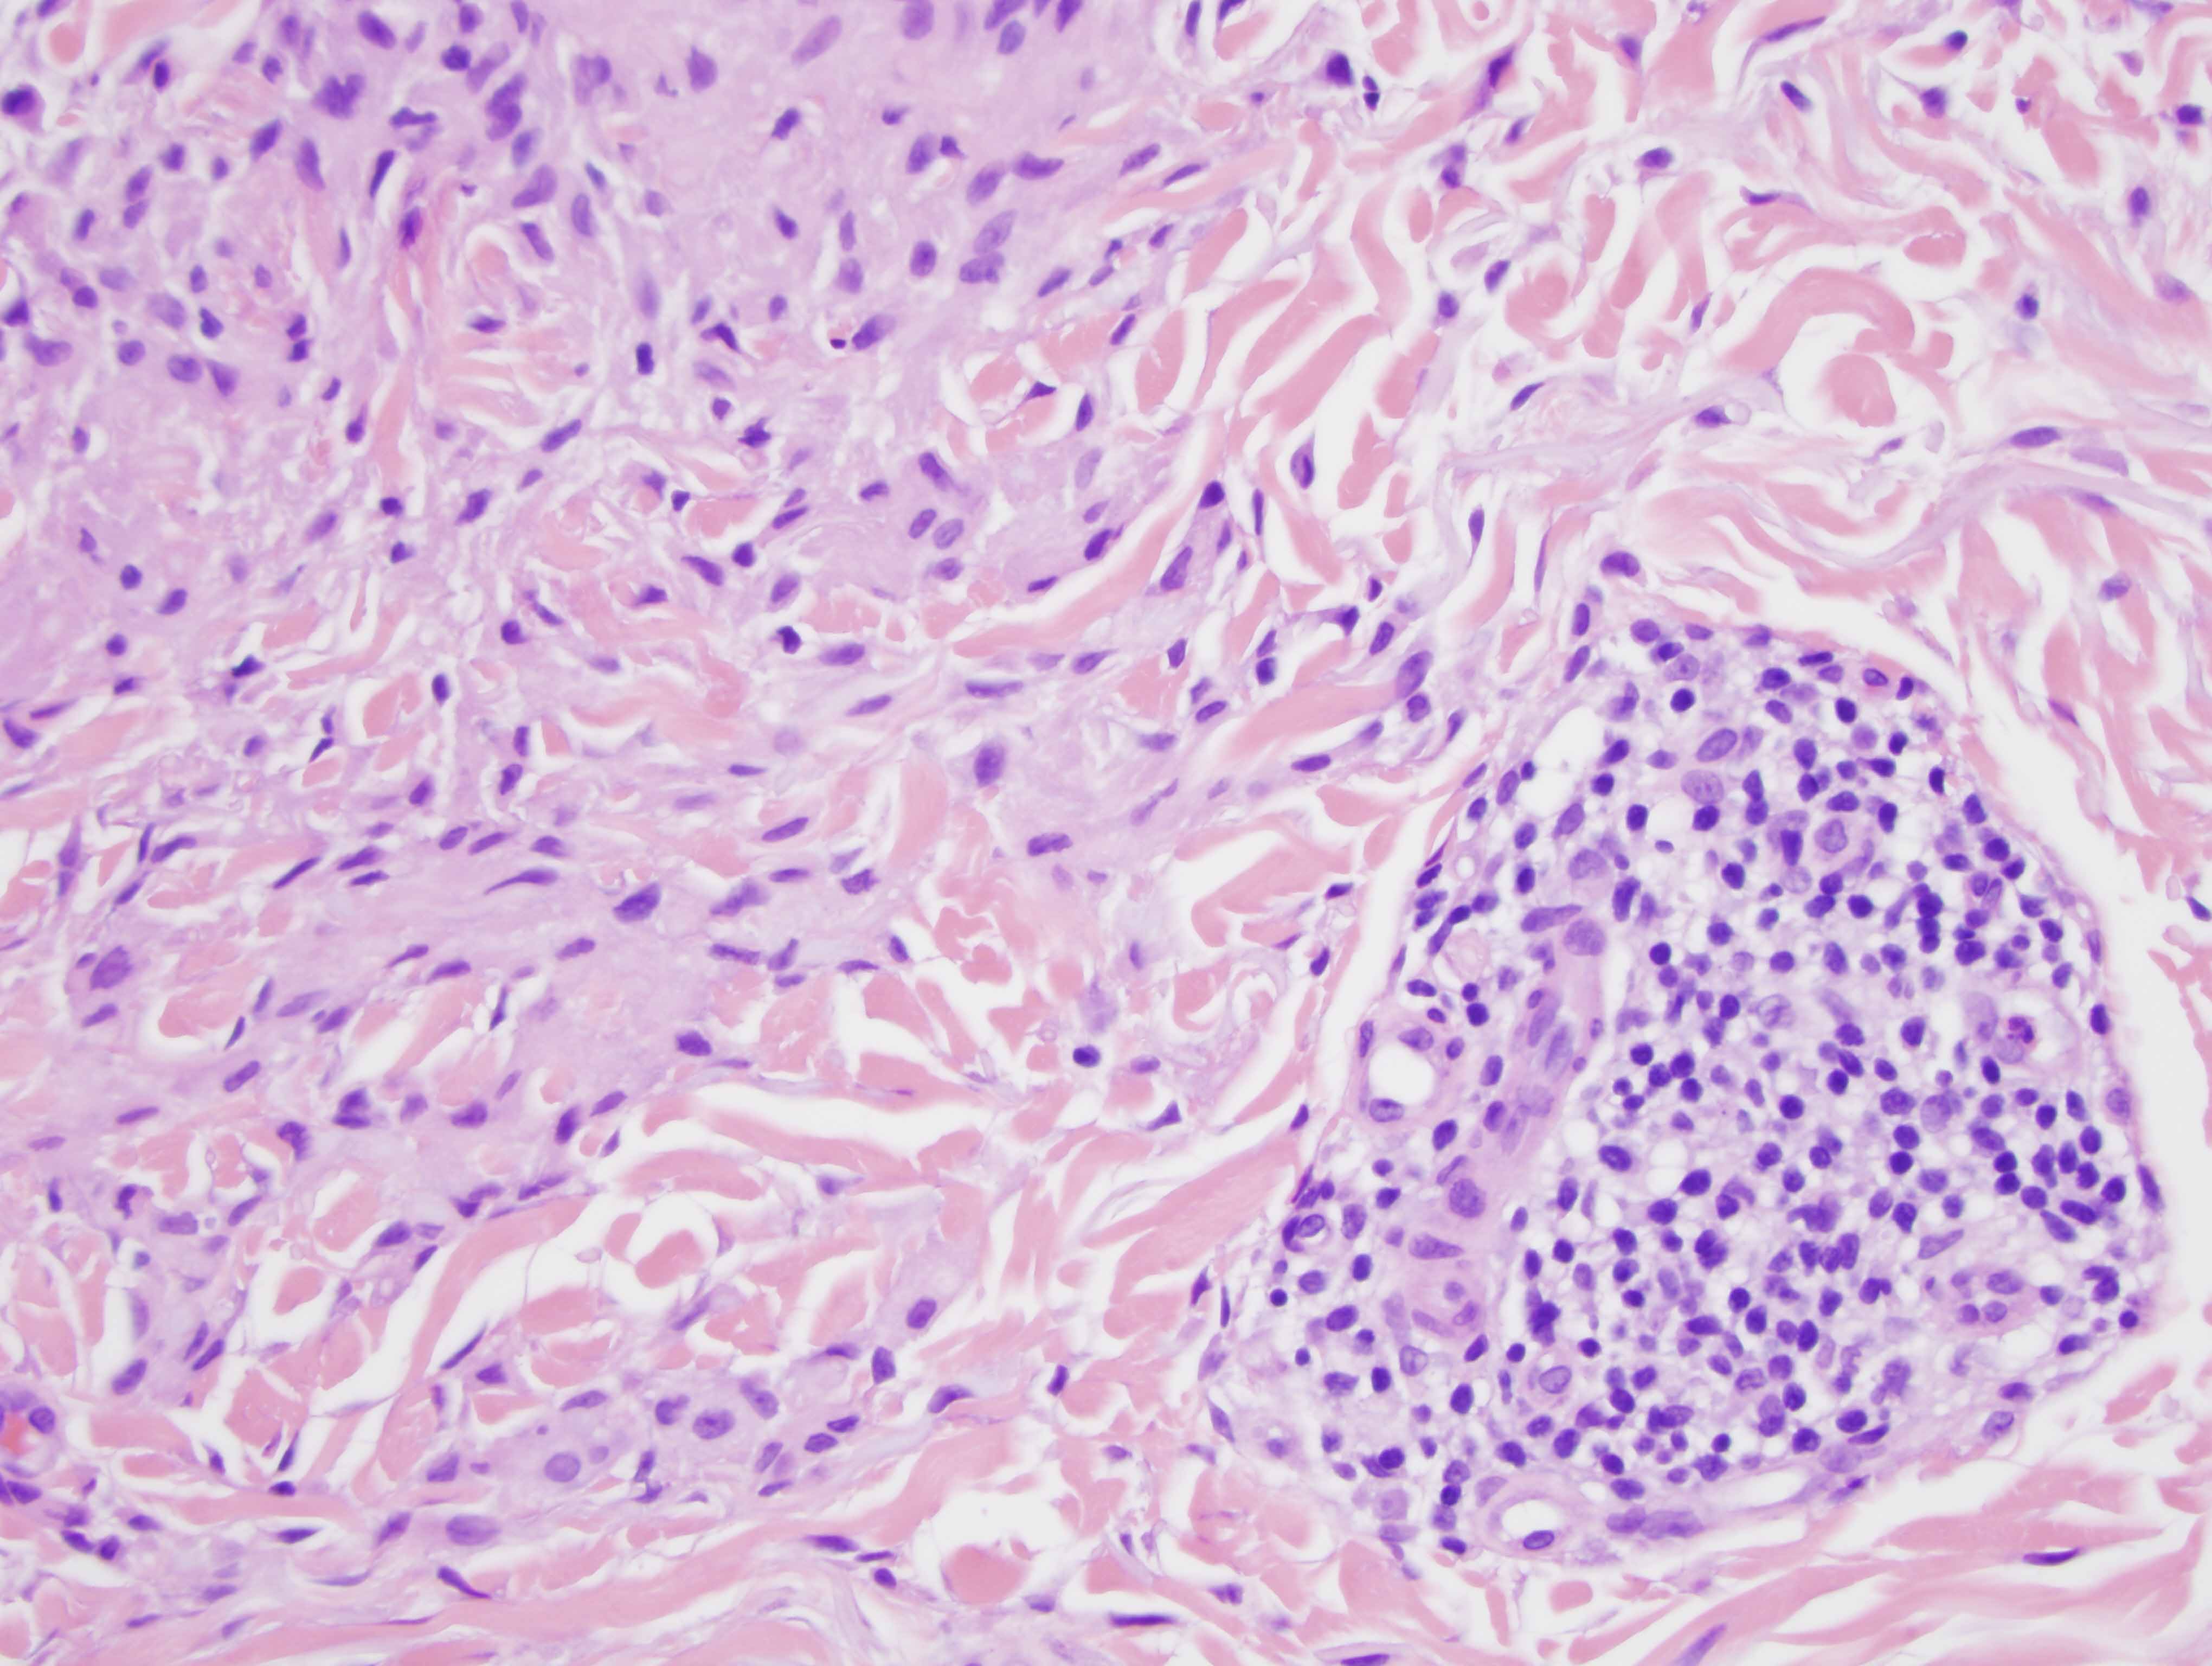 Slide 3: There is a supervening angiocentric lymphocytic infiltrate present in the superficial dermis.  A few of the collagen bundles appear somewhat sclerotic and are surrounded by histiocytes.